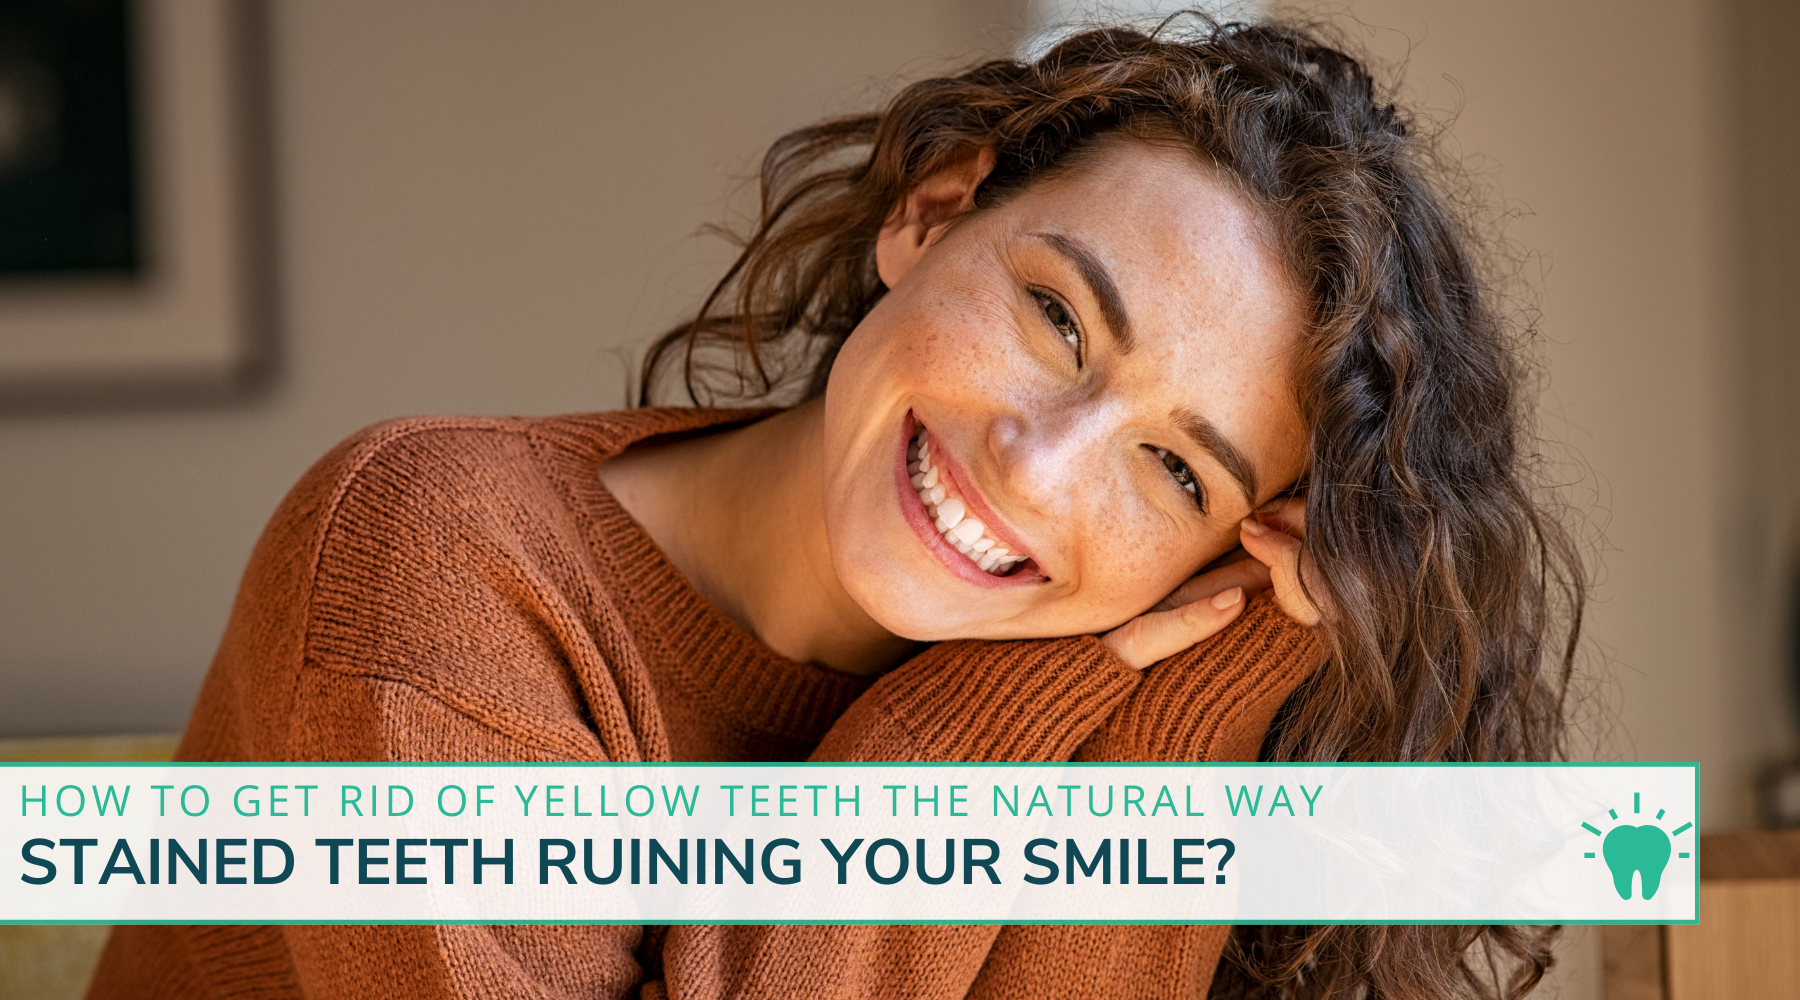 Stained Teeth Ruining Your Smile? How to Get Rid of Yellow Teeth the Natural Way